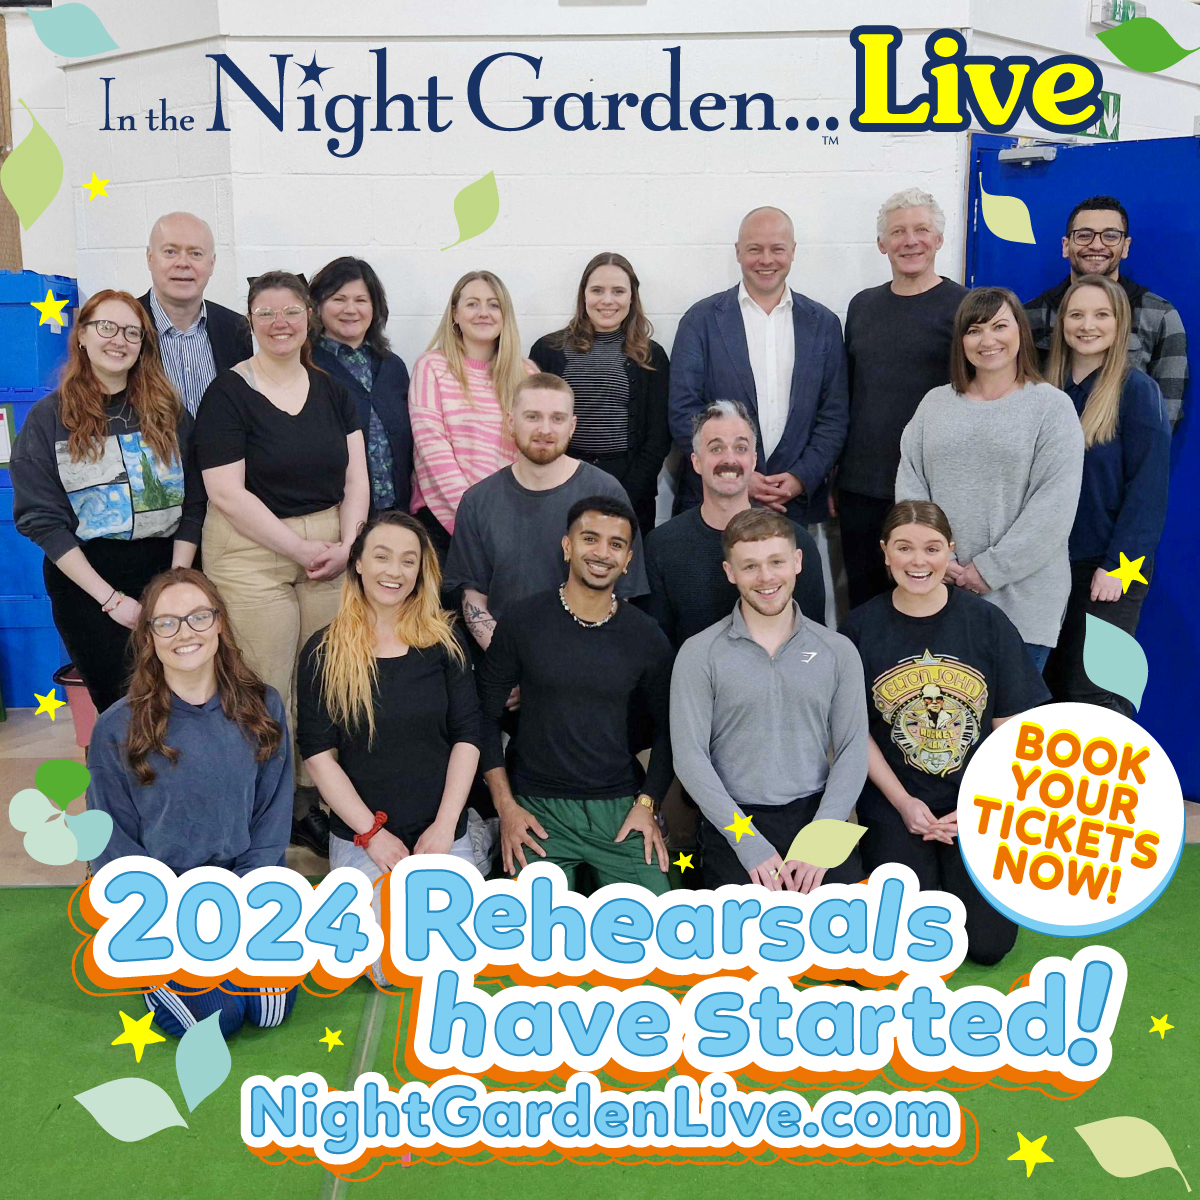 🤗 We have some exciting news! Rehearsals for #IntheNightGardenLive 2024 have started!🎉 The cast members and production team are very excited to be opening the show in 2 weeks' time. Not long now! Don't miss it, book now at ➡️ NightGardenLive.com Pip-pip, onk-onk 🍃☀️